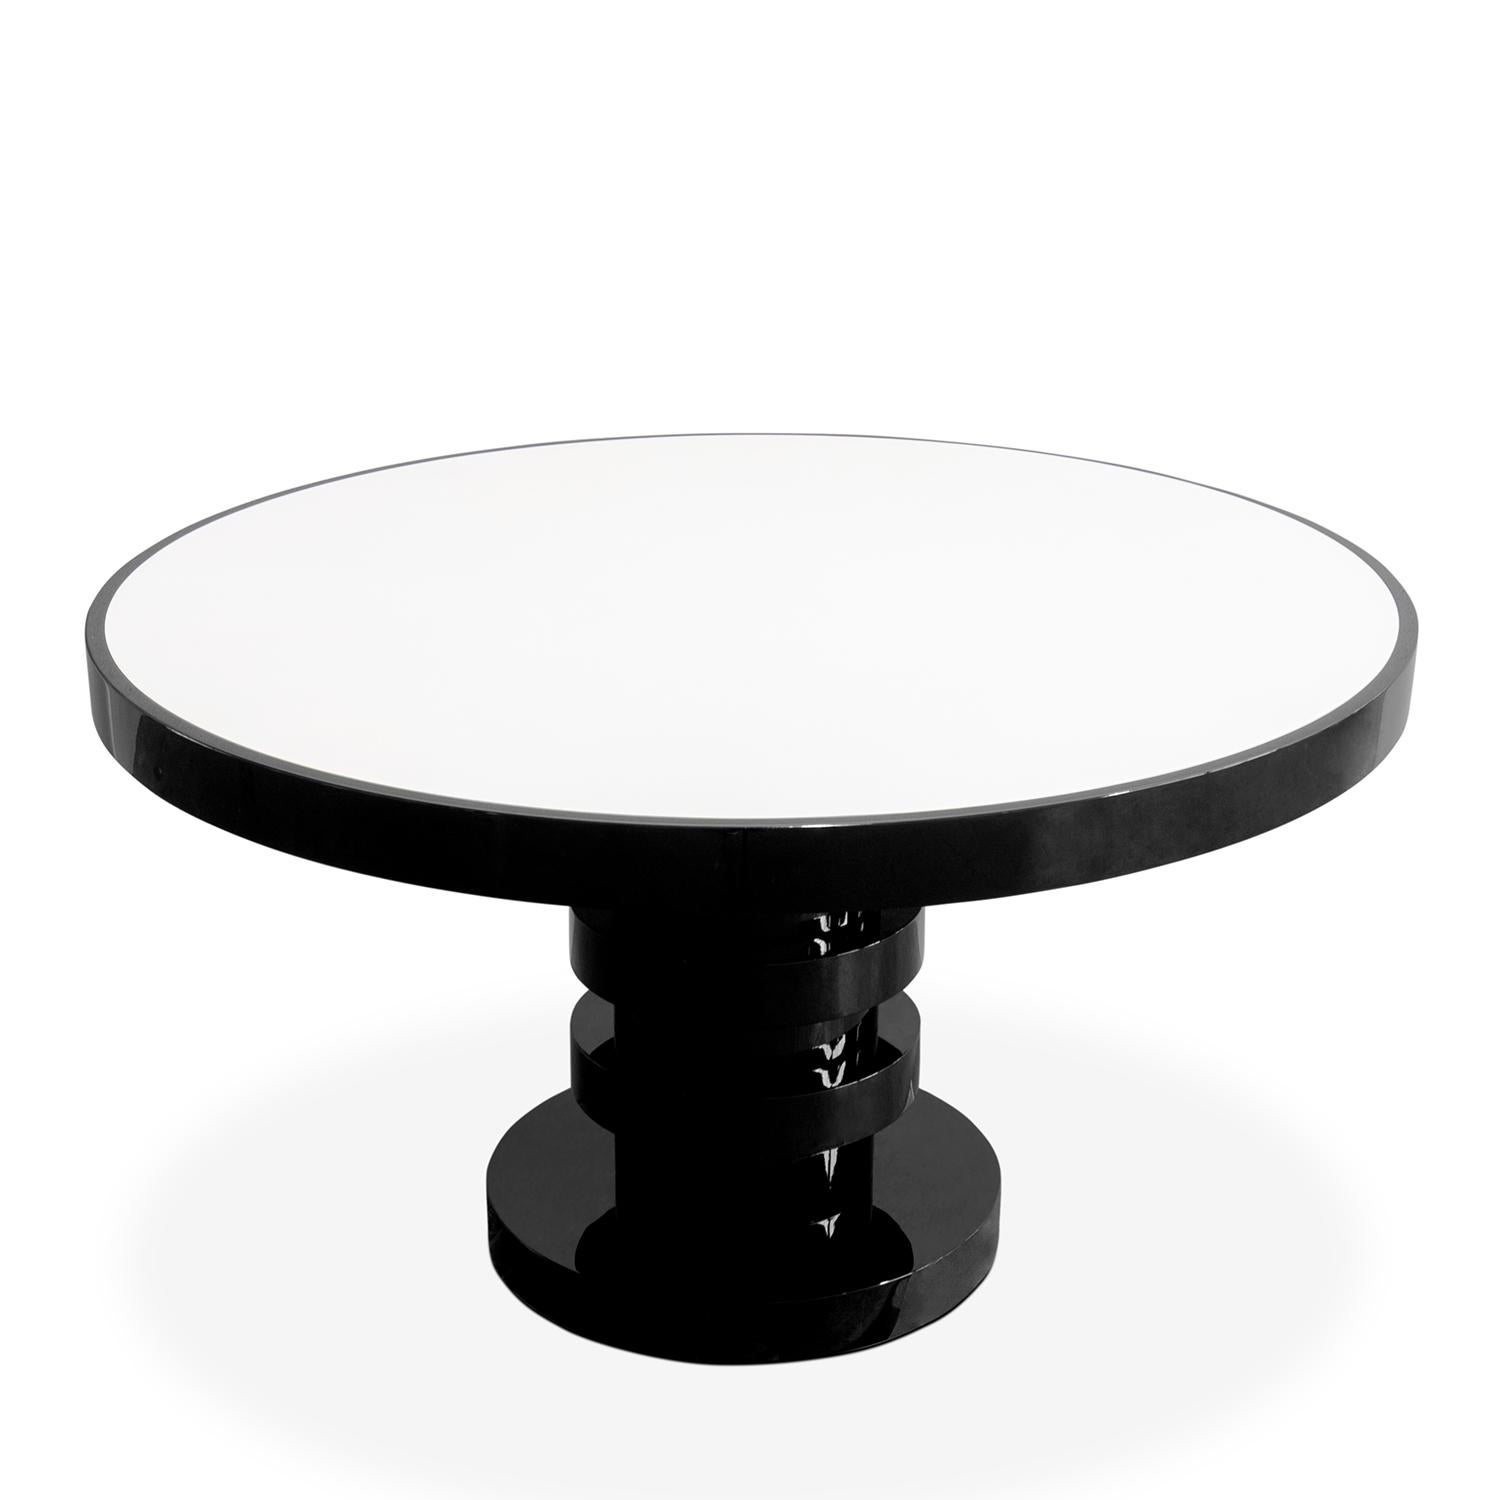 Portuguese Nagoya Round Dining Table For Sale